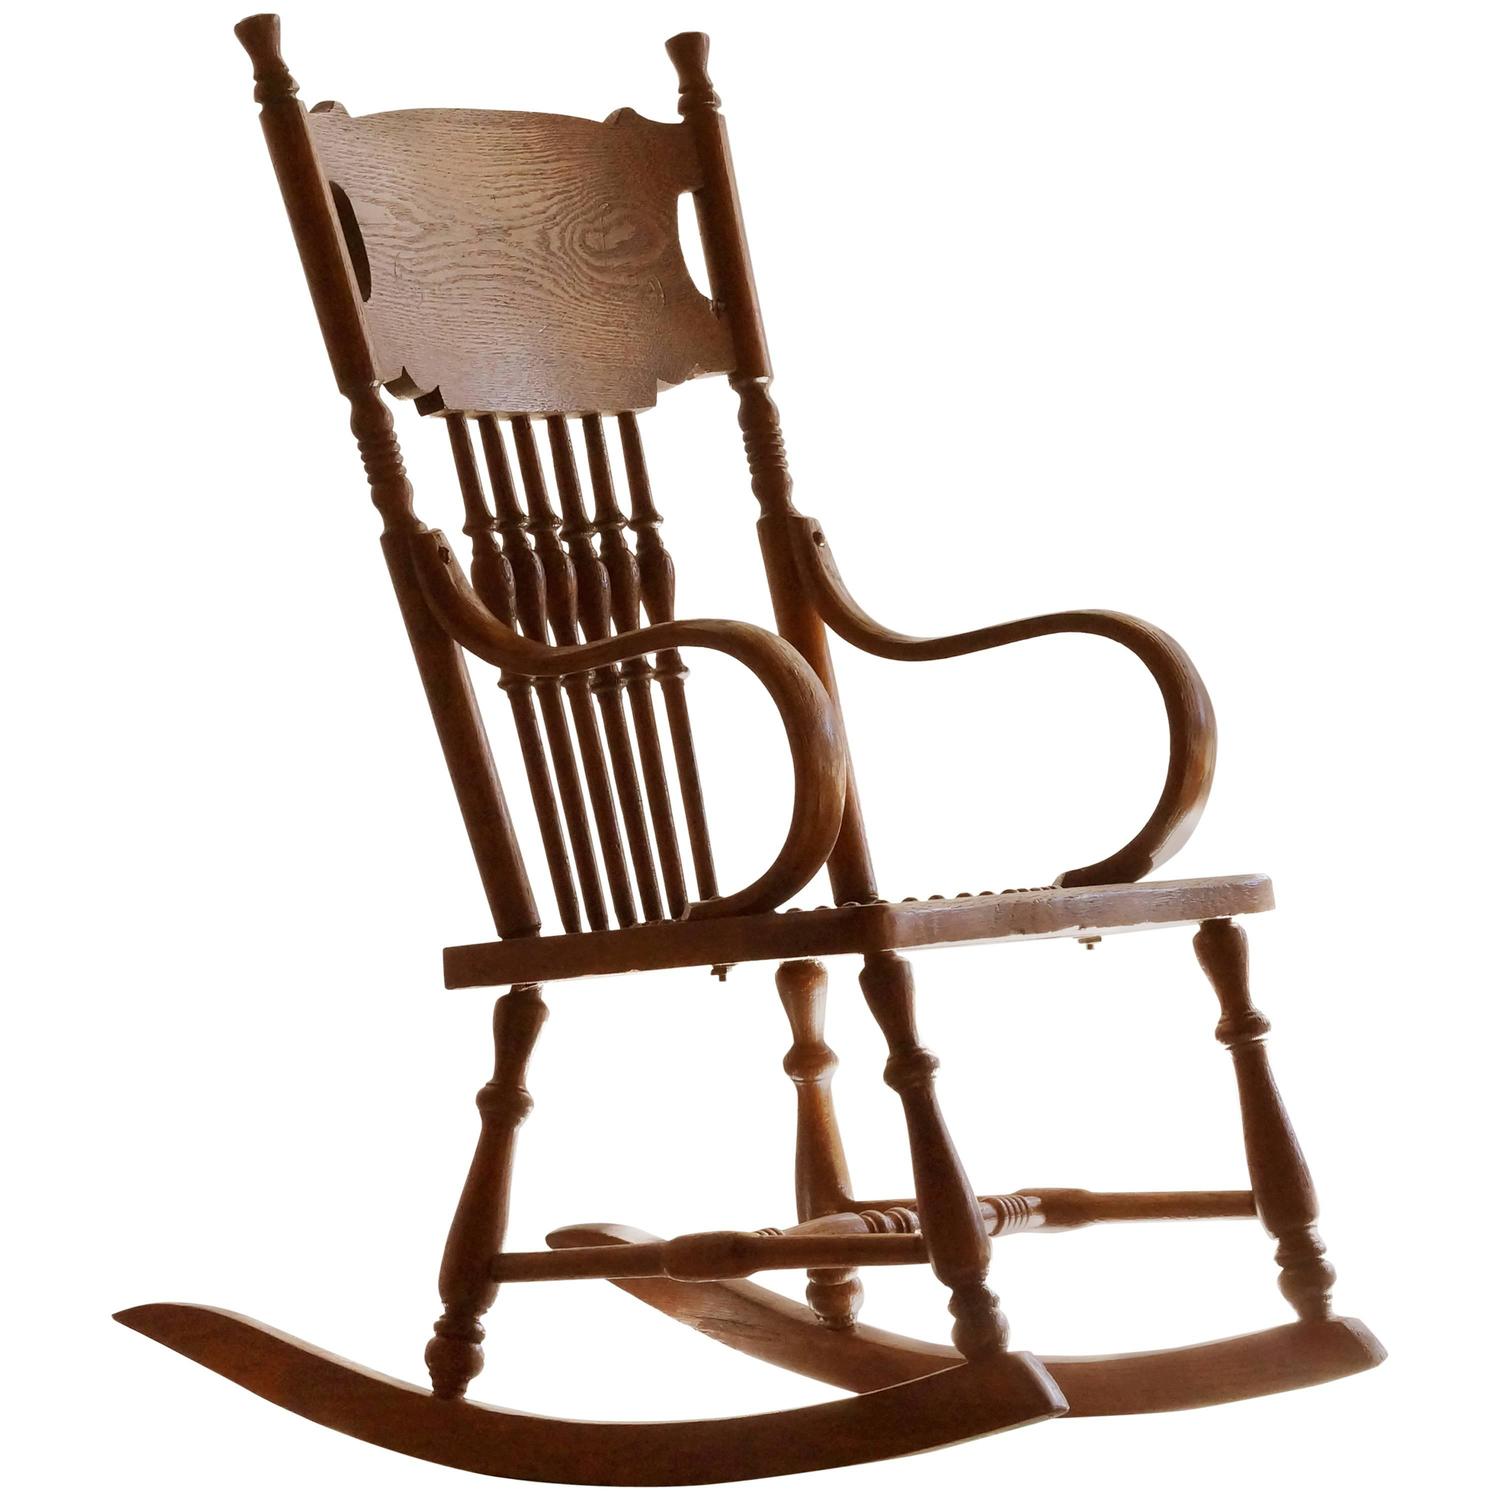 Antique Child's Rocking Chair with HandTooled Leather